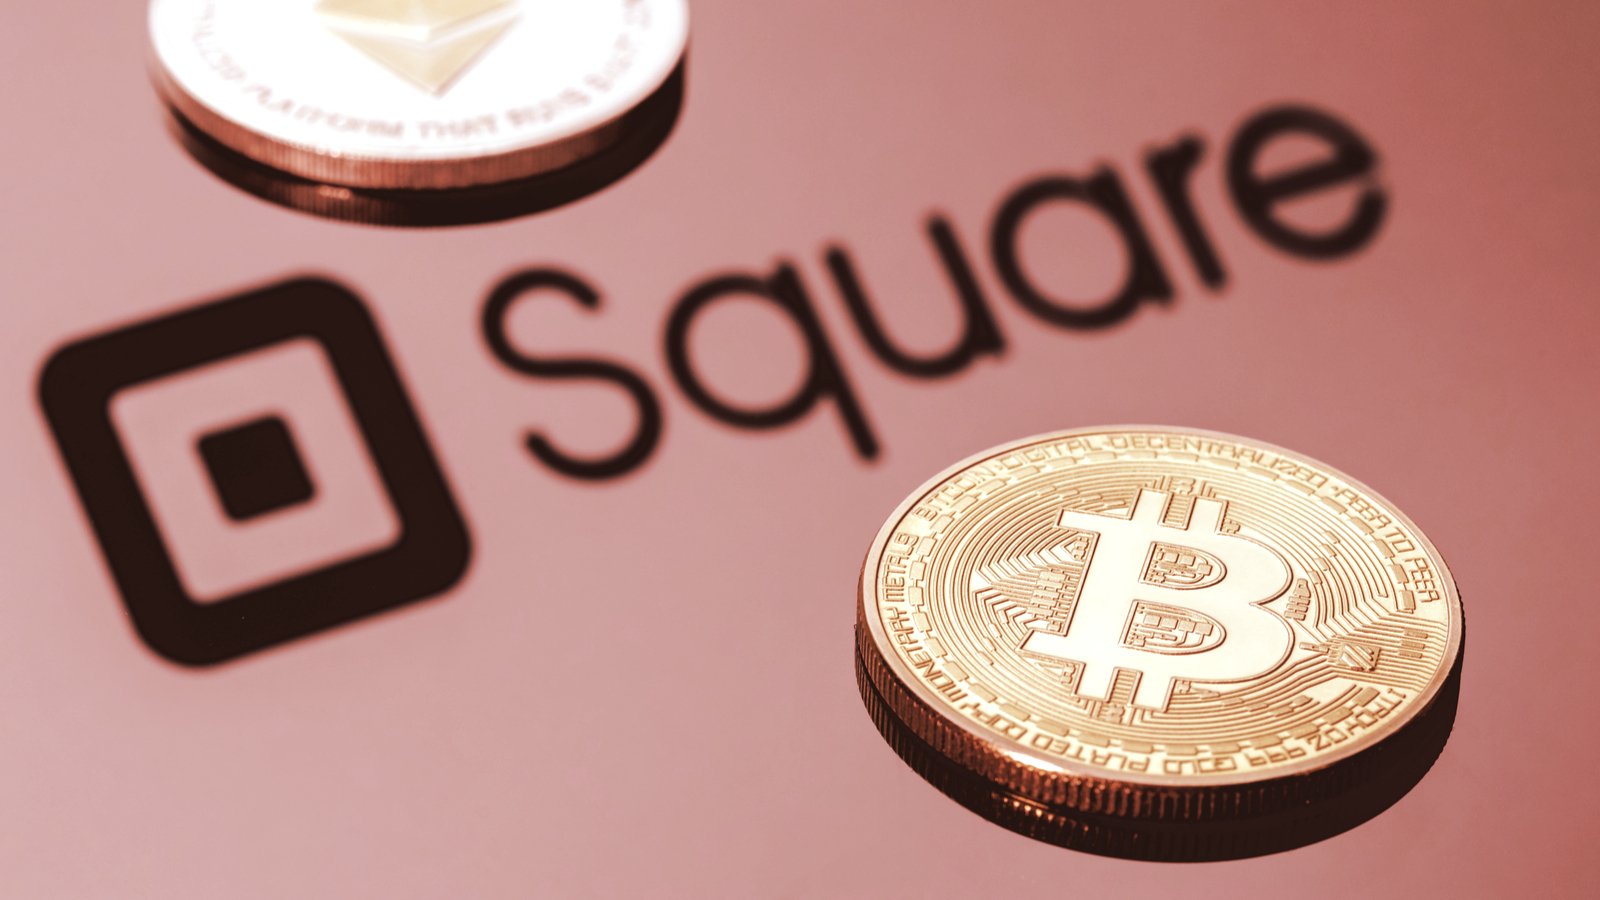 Square and Bitcoin. Image: Shutterstock